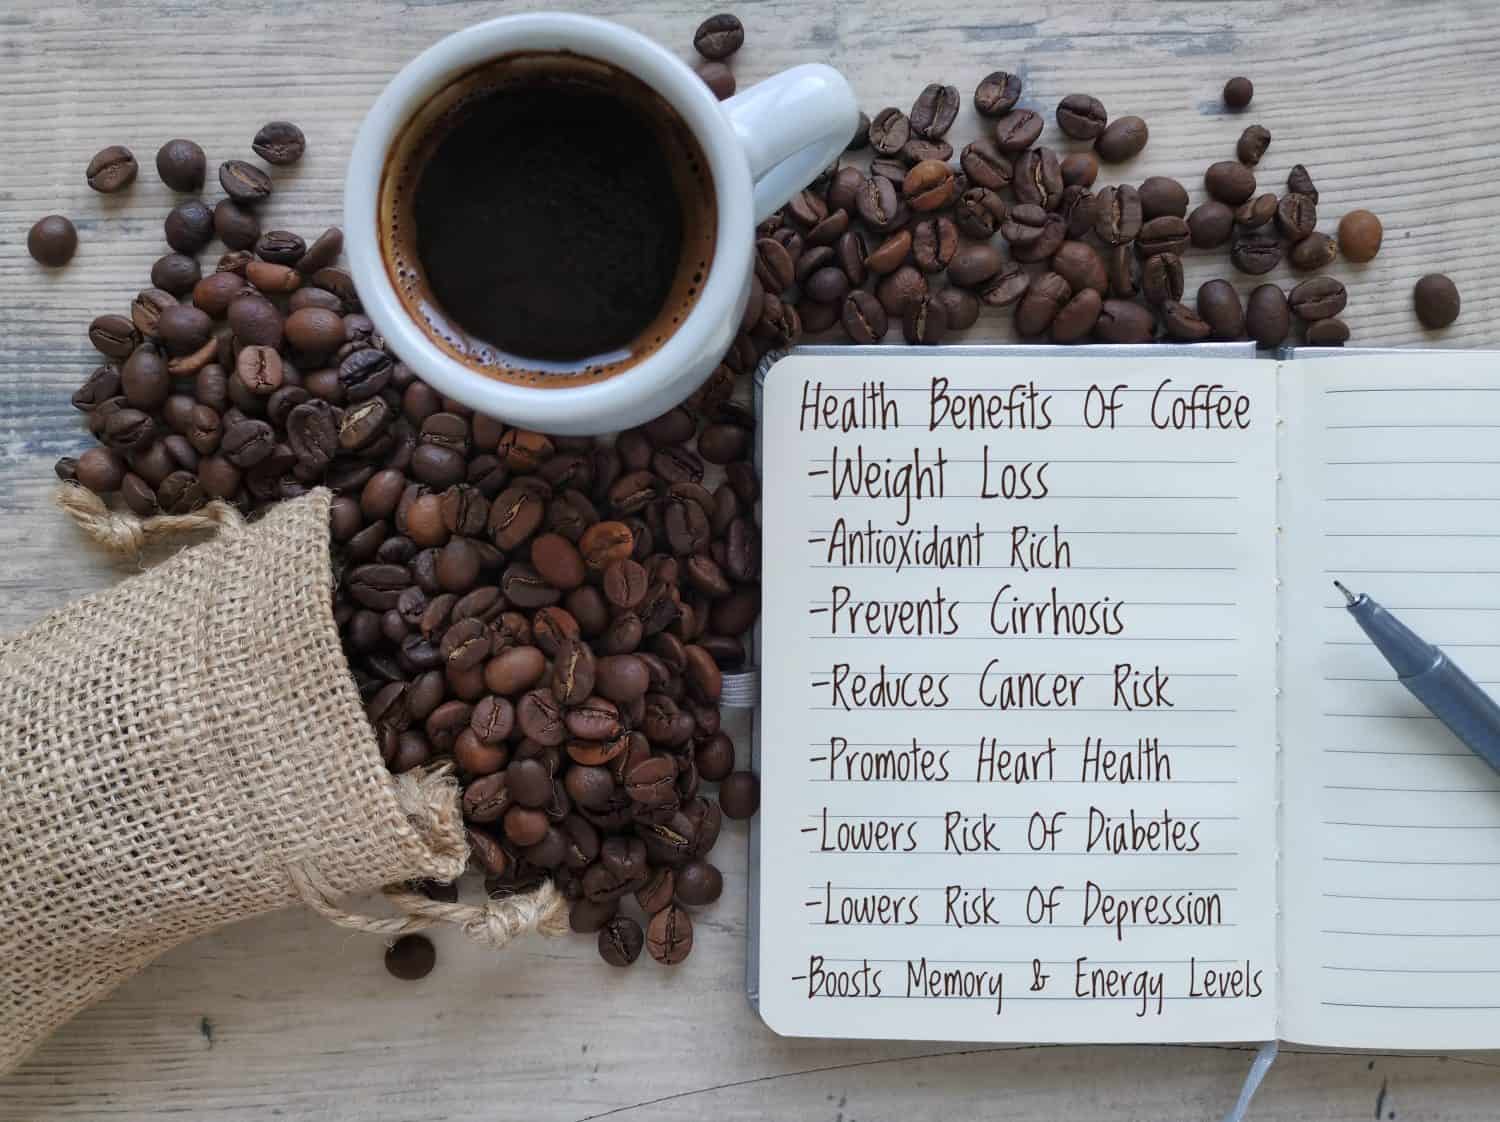 The list of black coffee health benefits. Overturned rustic bag with spilled coffee beans, pen and notebook written with text Health Benefits of Coffee. Black coffee benefits and nutrition.